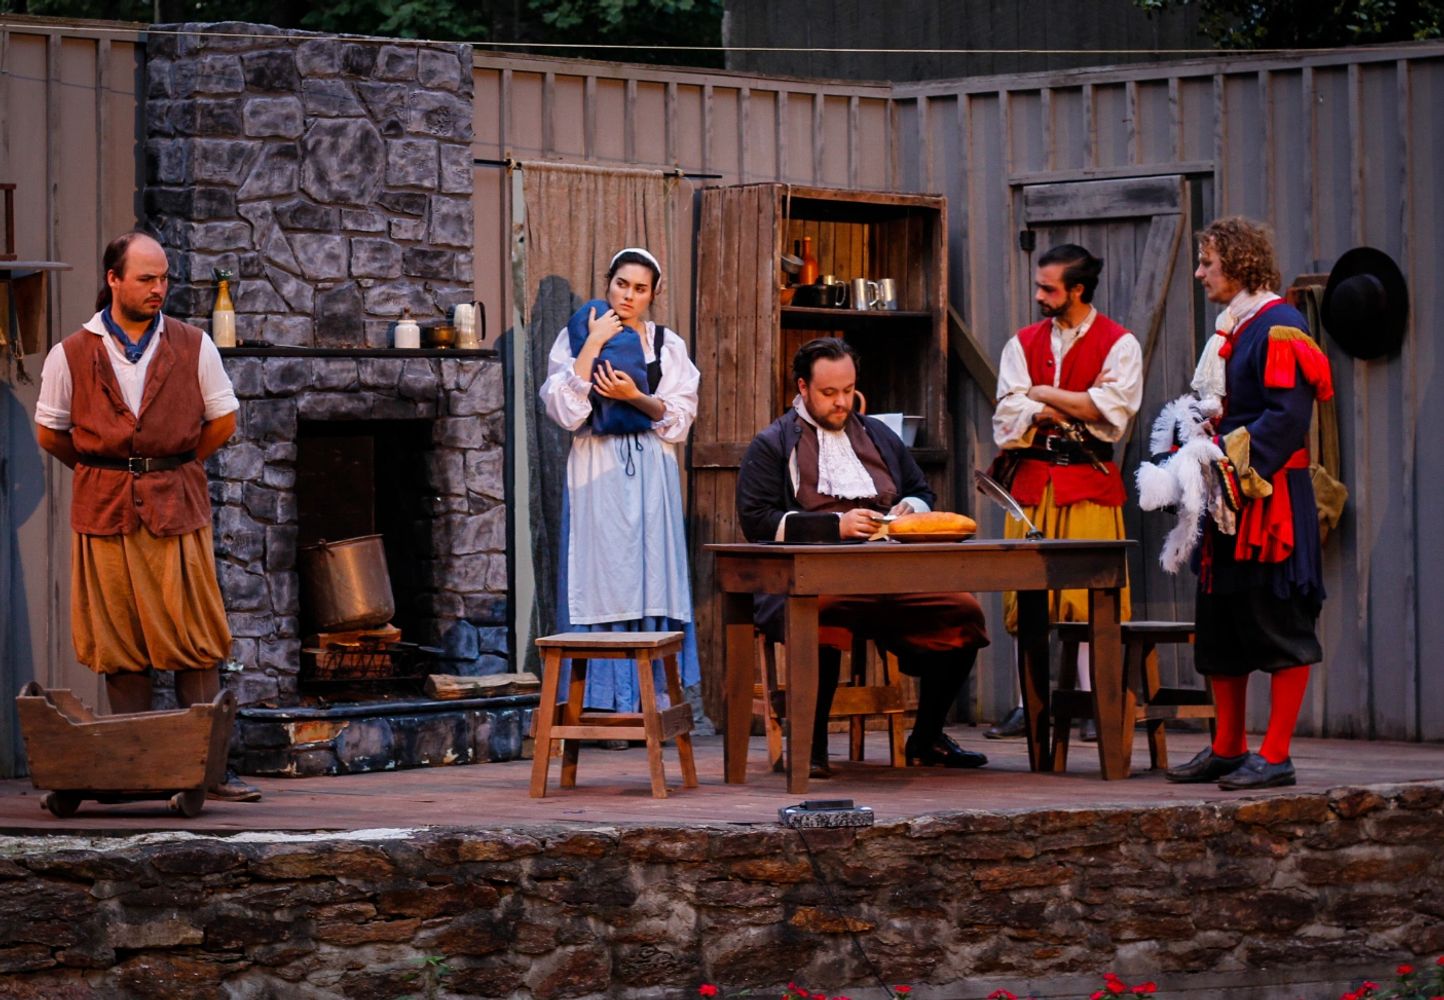 A scene from our historic outdoor drama "From This Day Forward"